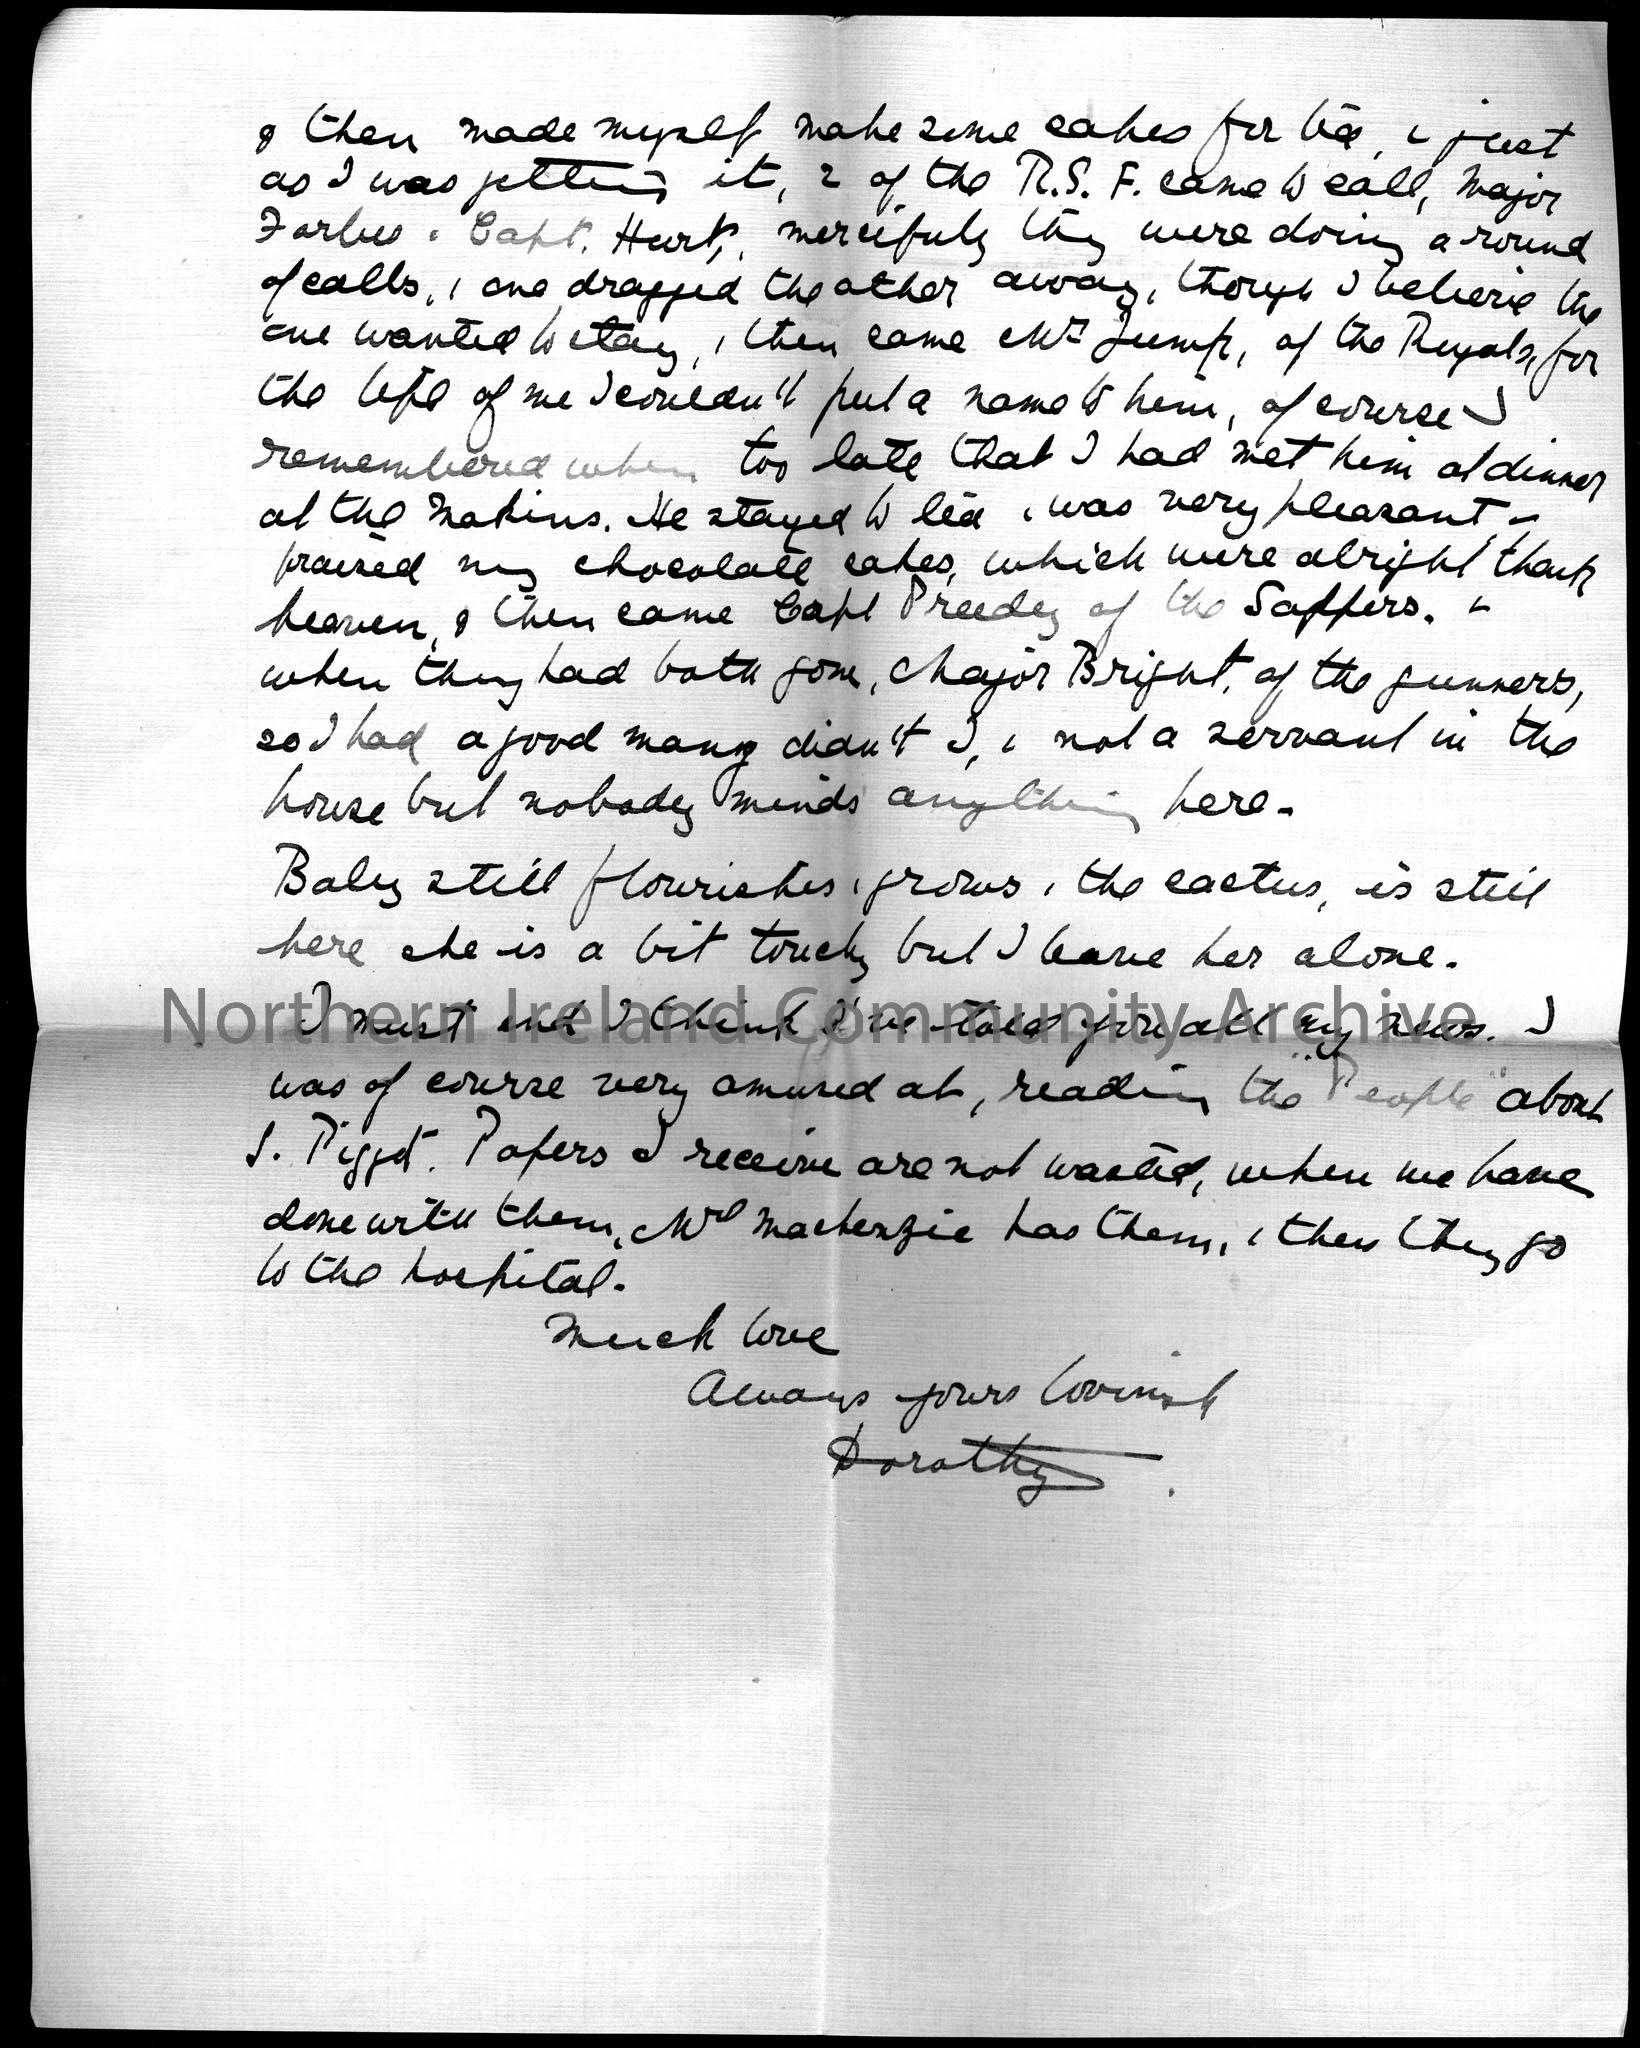 letter from Dorothy Arter Hezlet to her mother from Pretoria, Roberts Heights, dated Sun April 21st 1912. Dorothy writes that her mother is currently … – CM.2014.1208.3 front